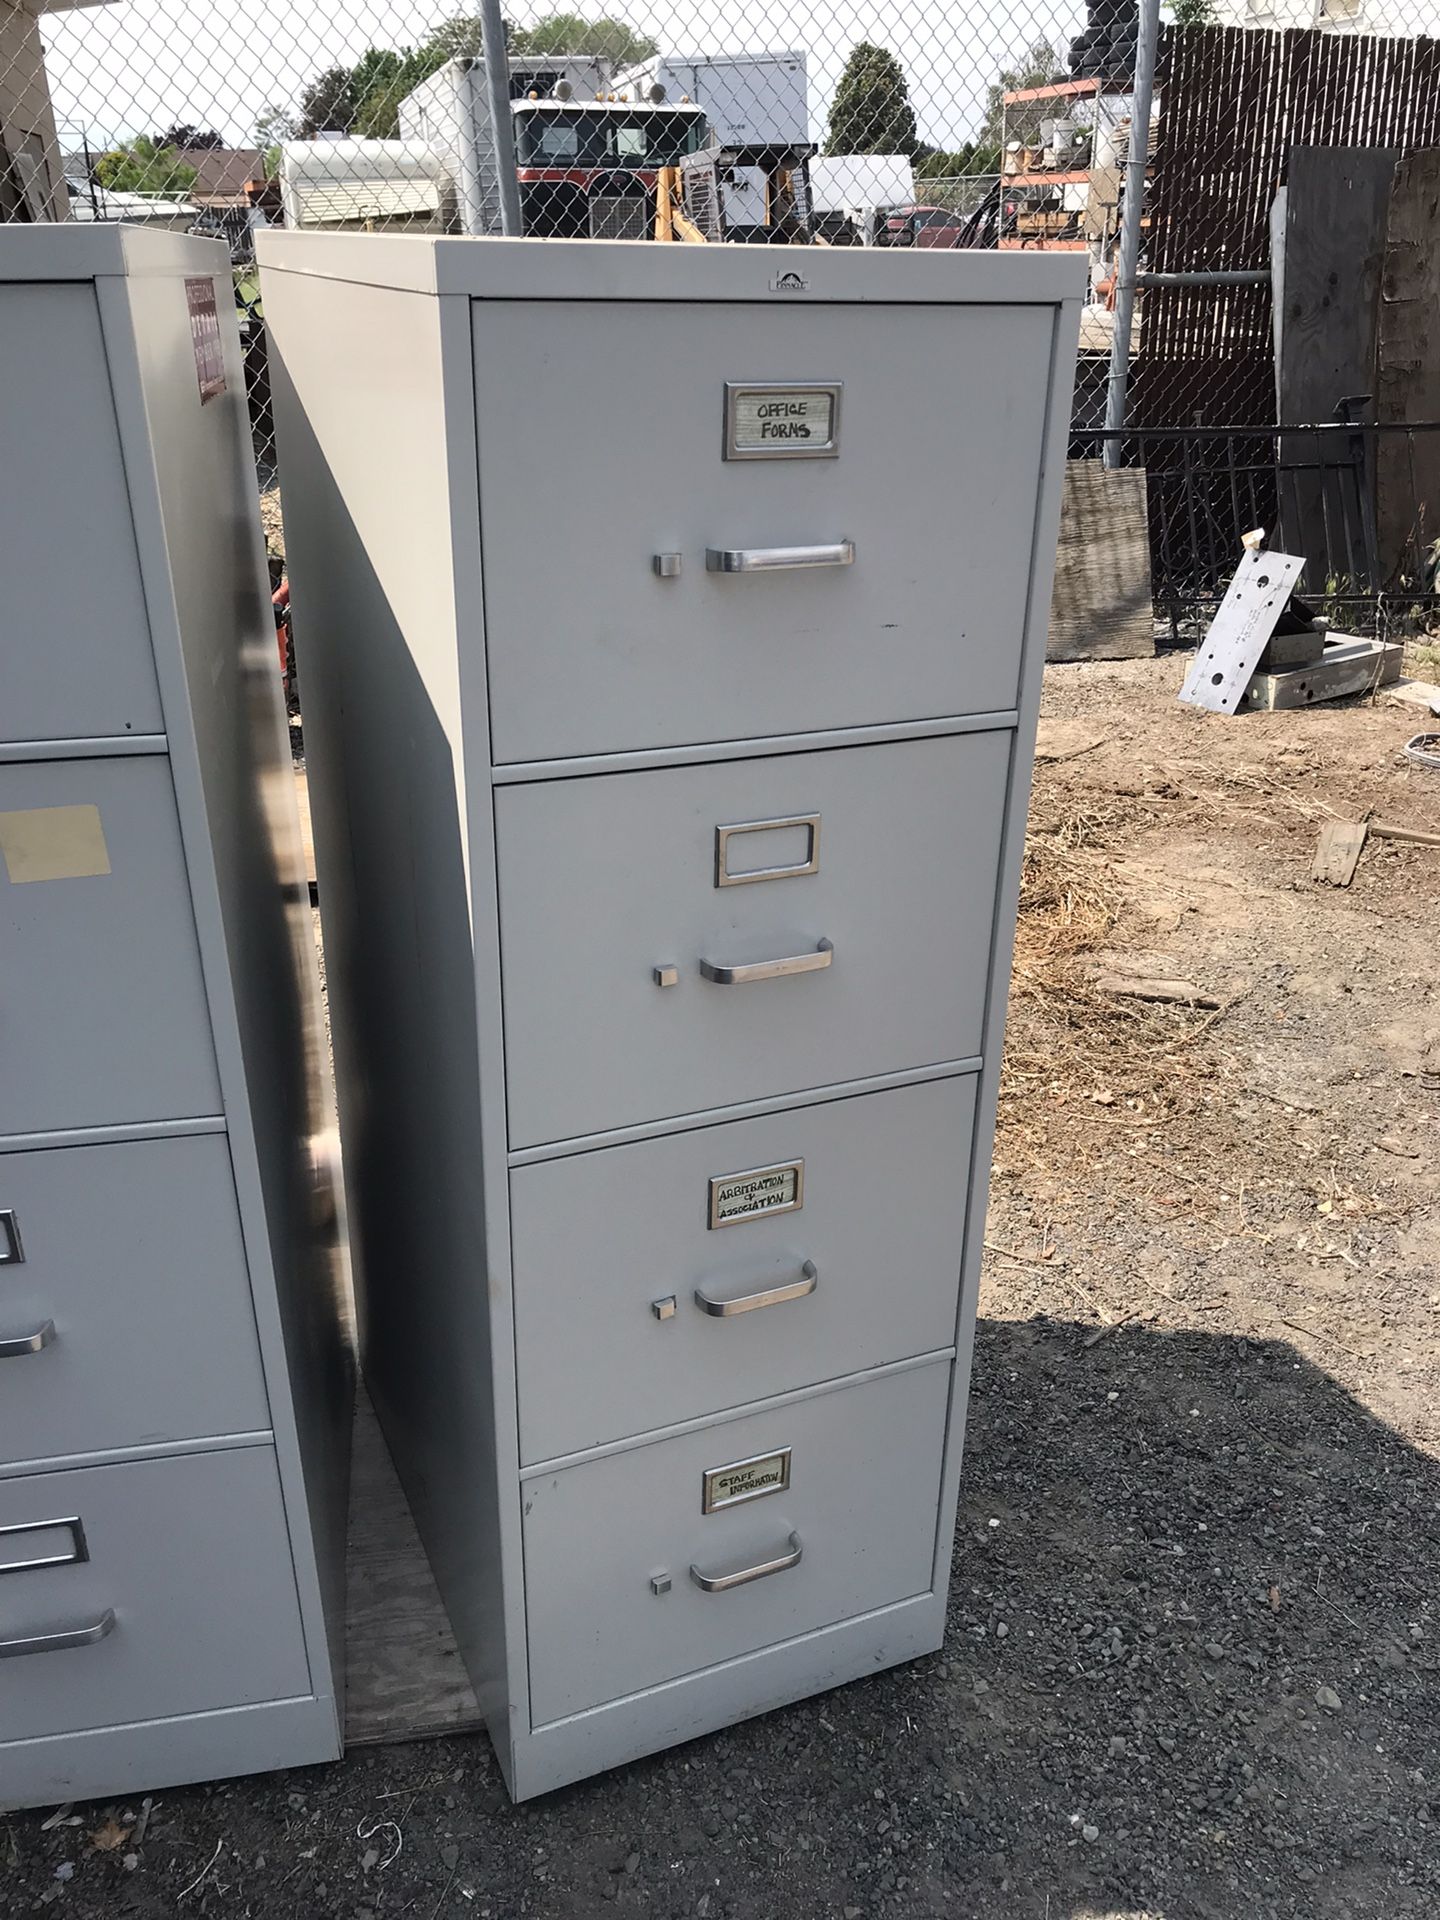 2-4 Drawer Legal Metal file Cabinets W/hanging Folders. $40.00 Each